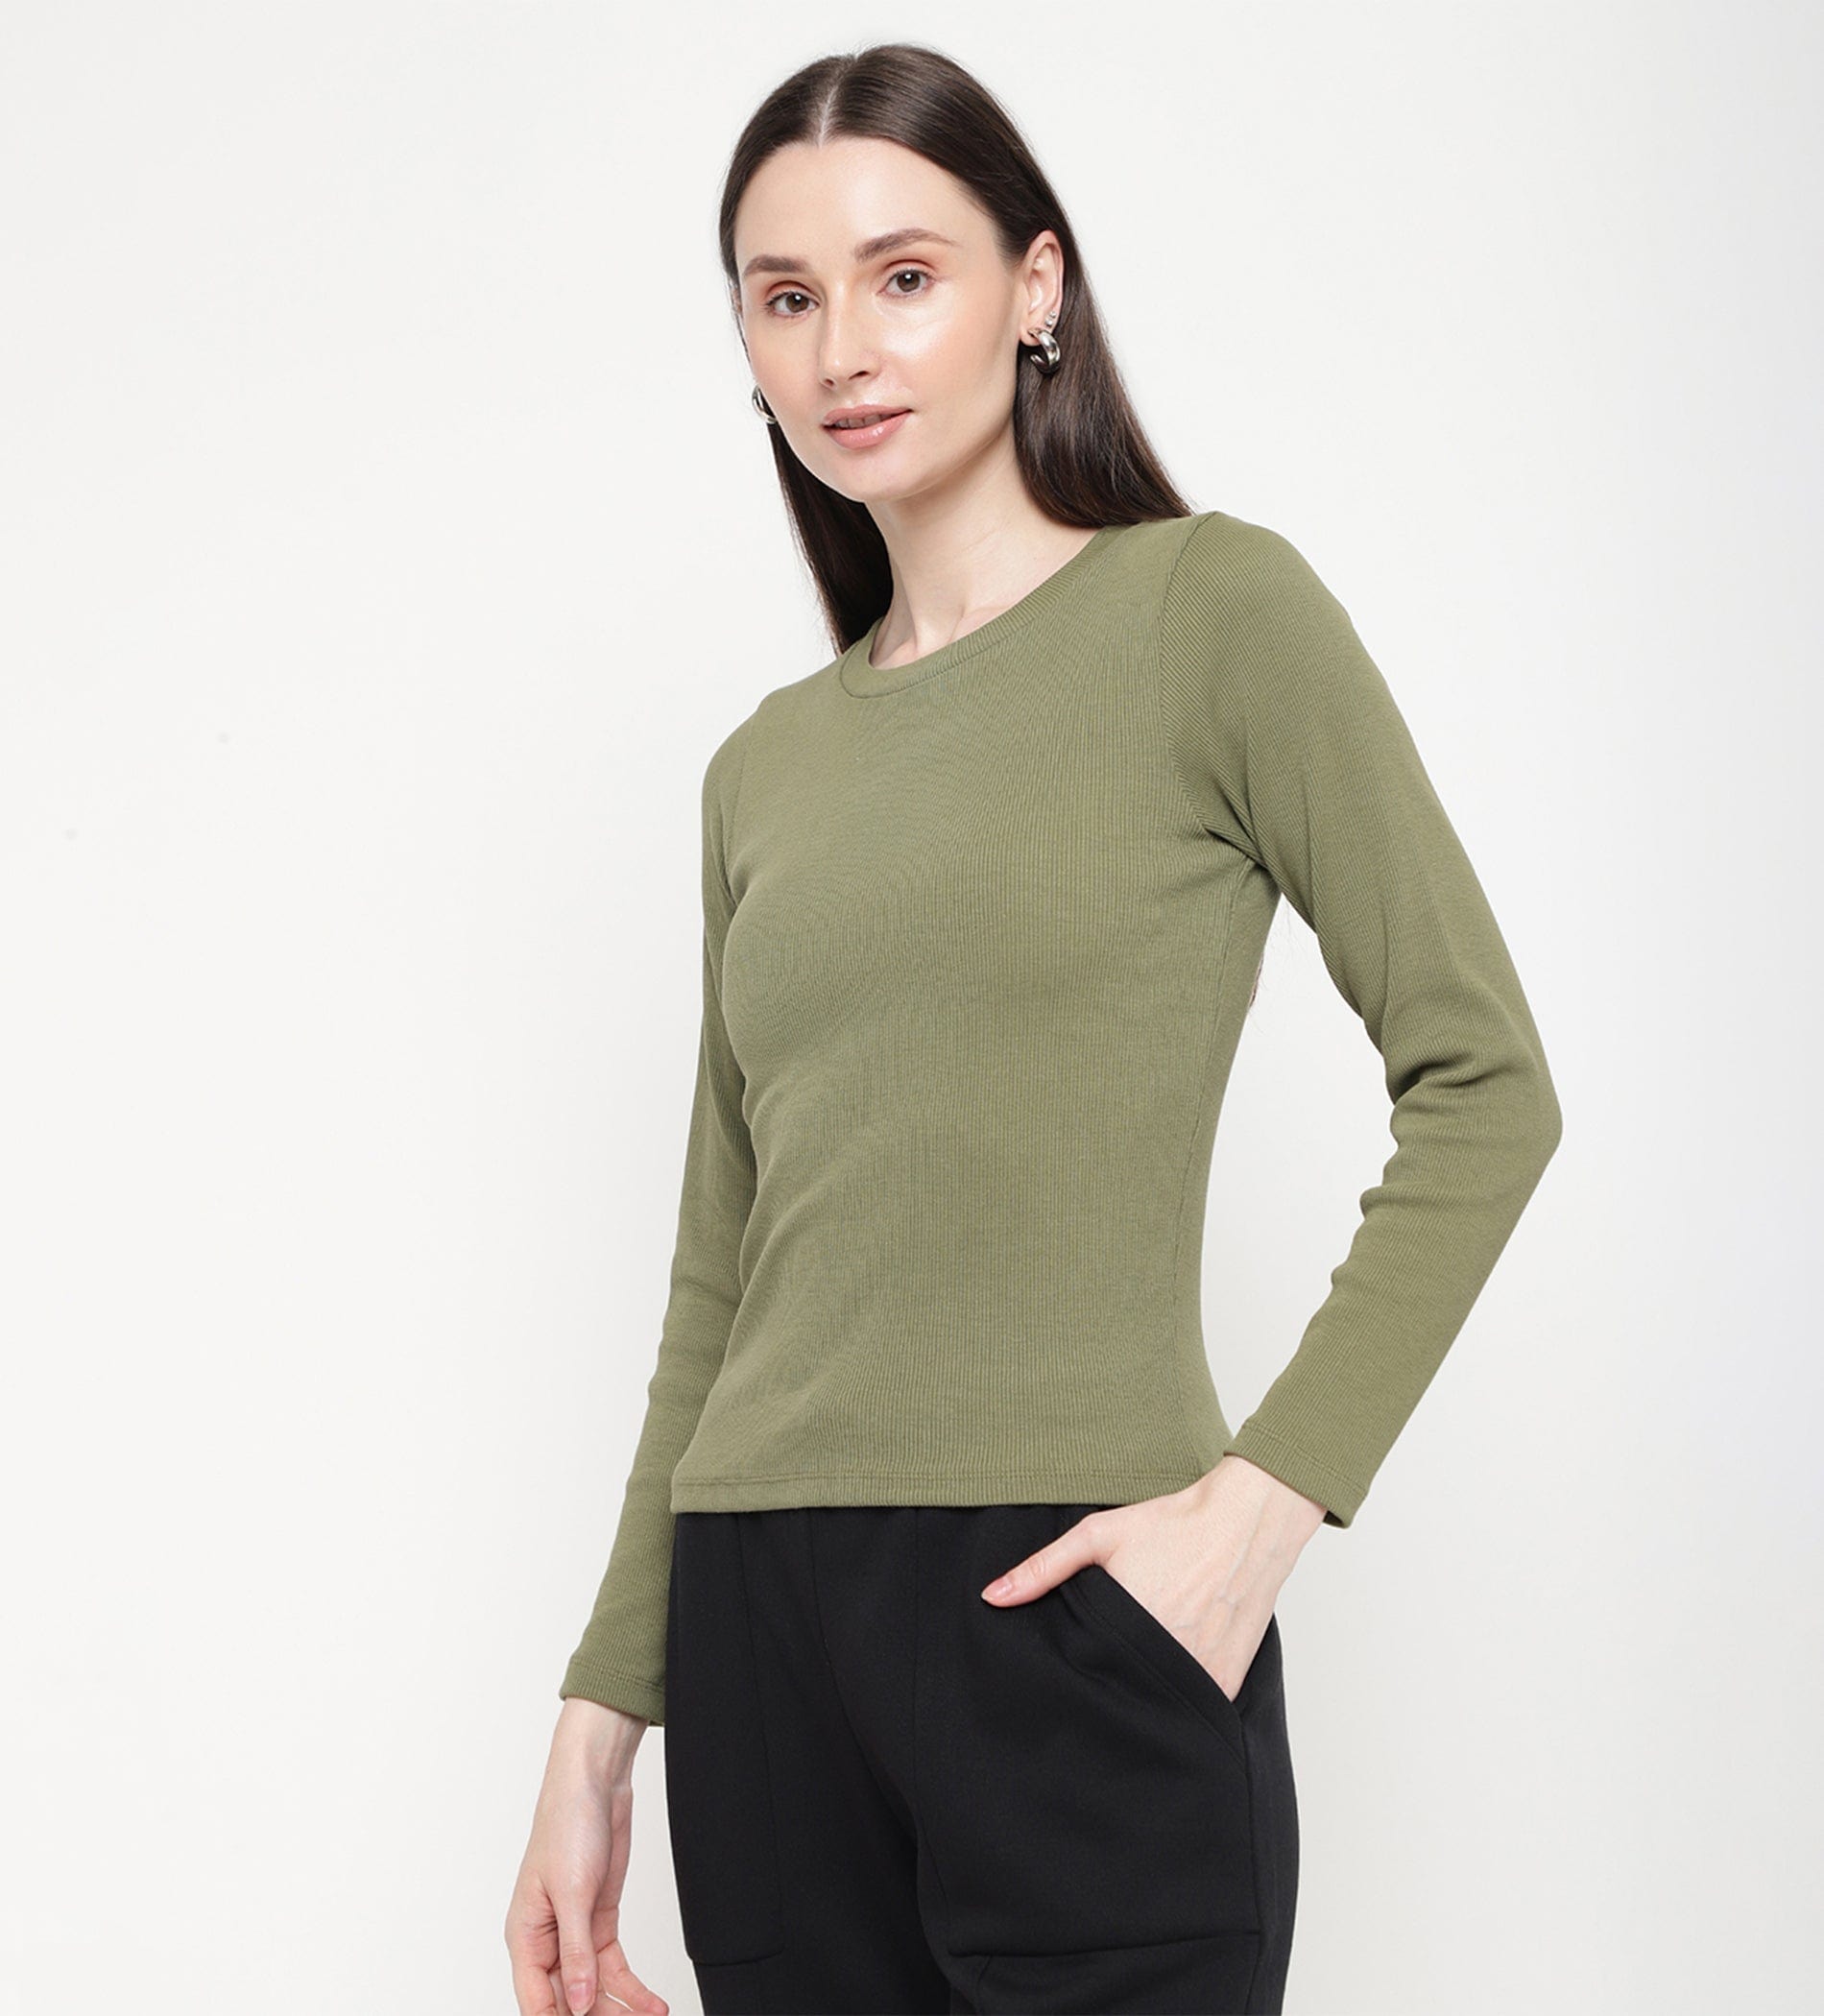 Tanks & Tops Tops Olive Rib Knit Top for Women